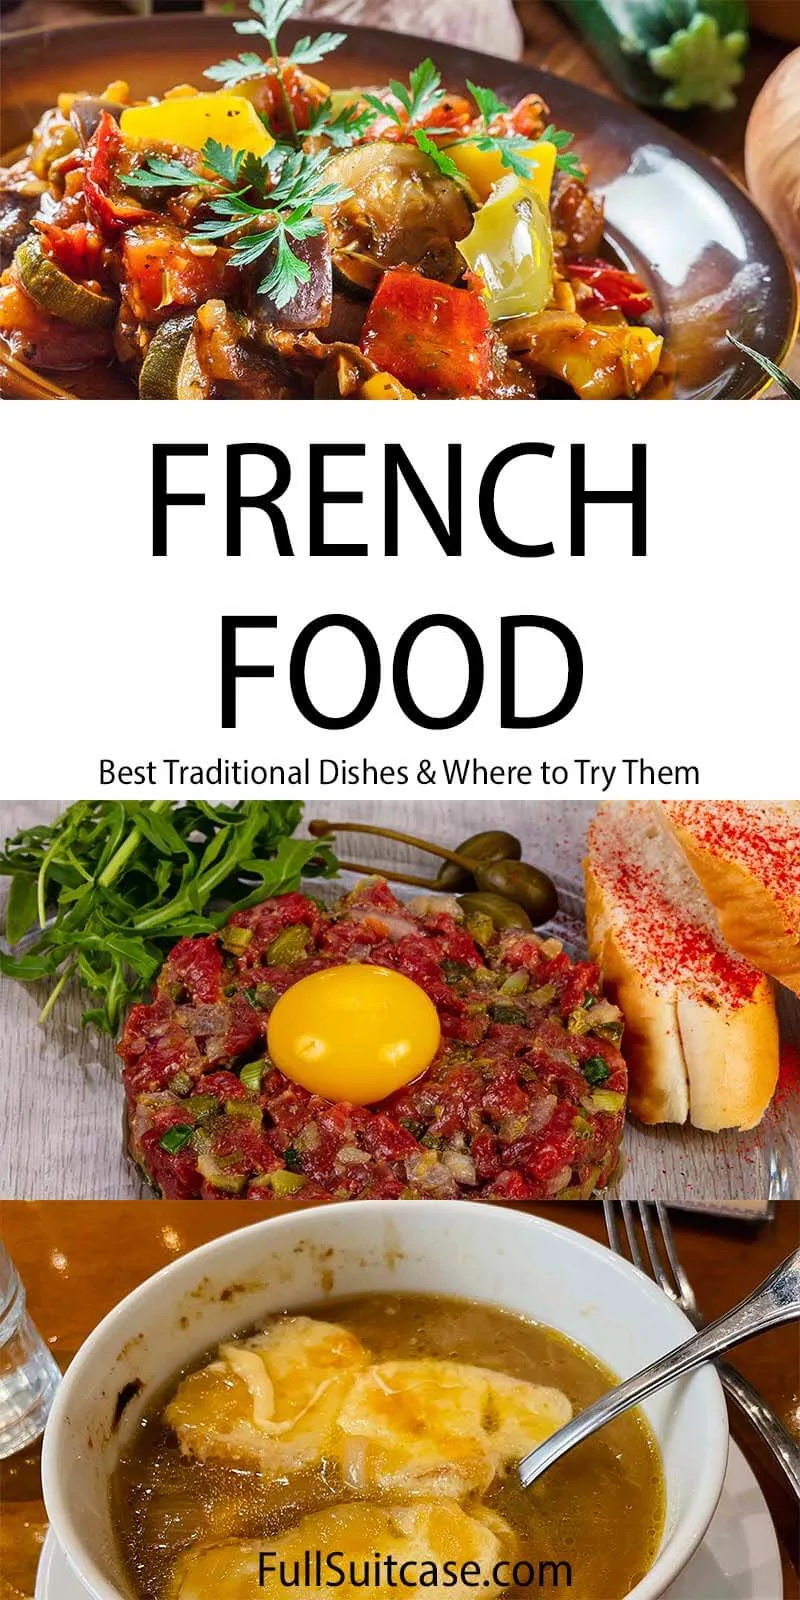 French food, popular traditional dishes, and typical desserts to try in France